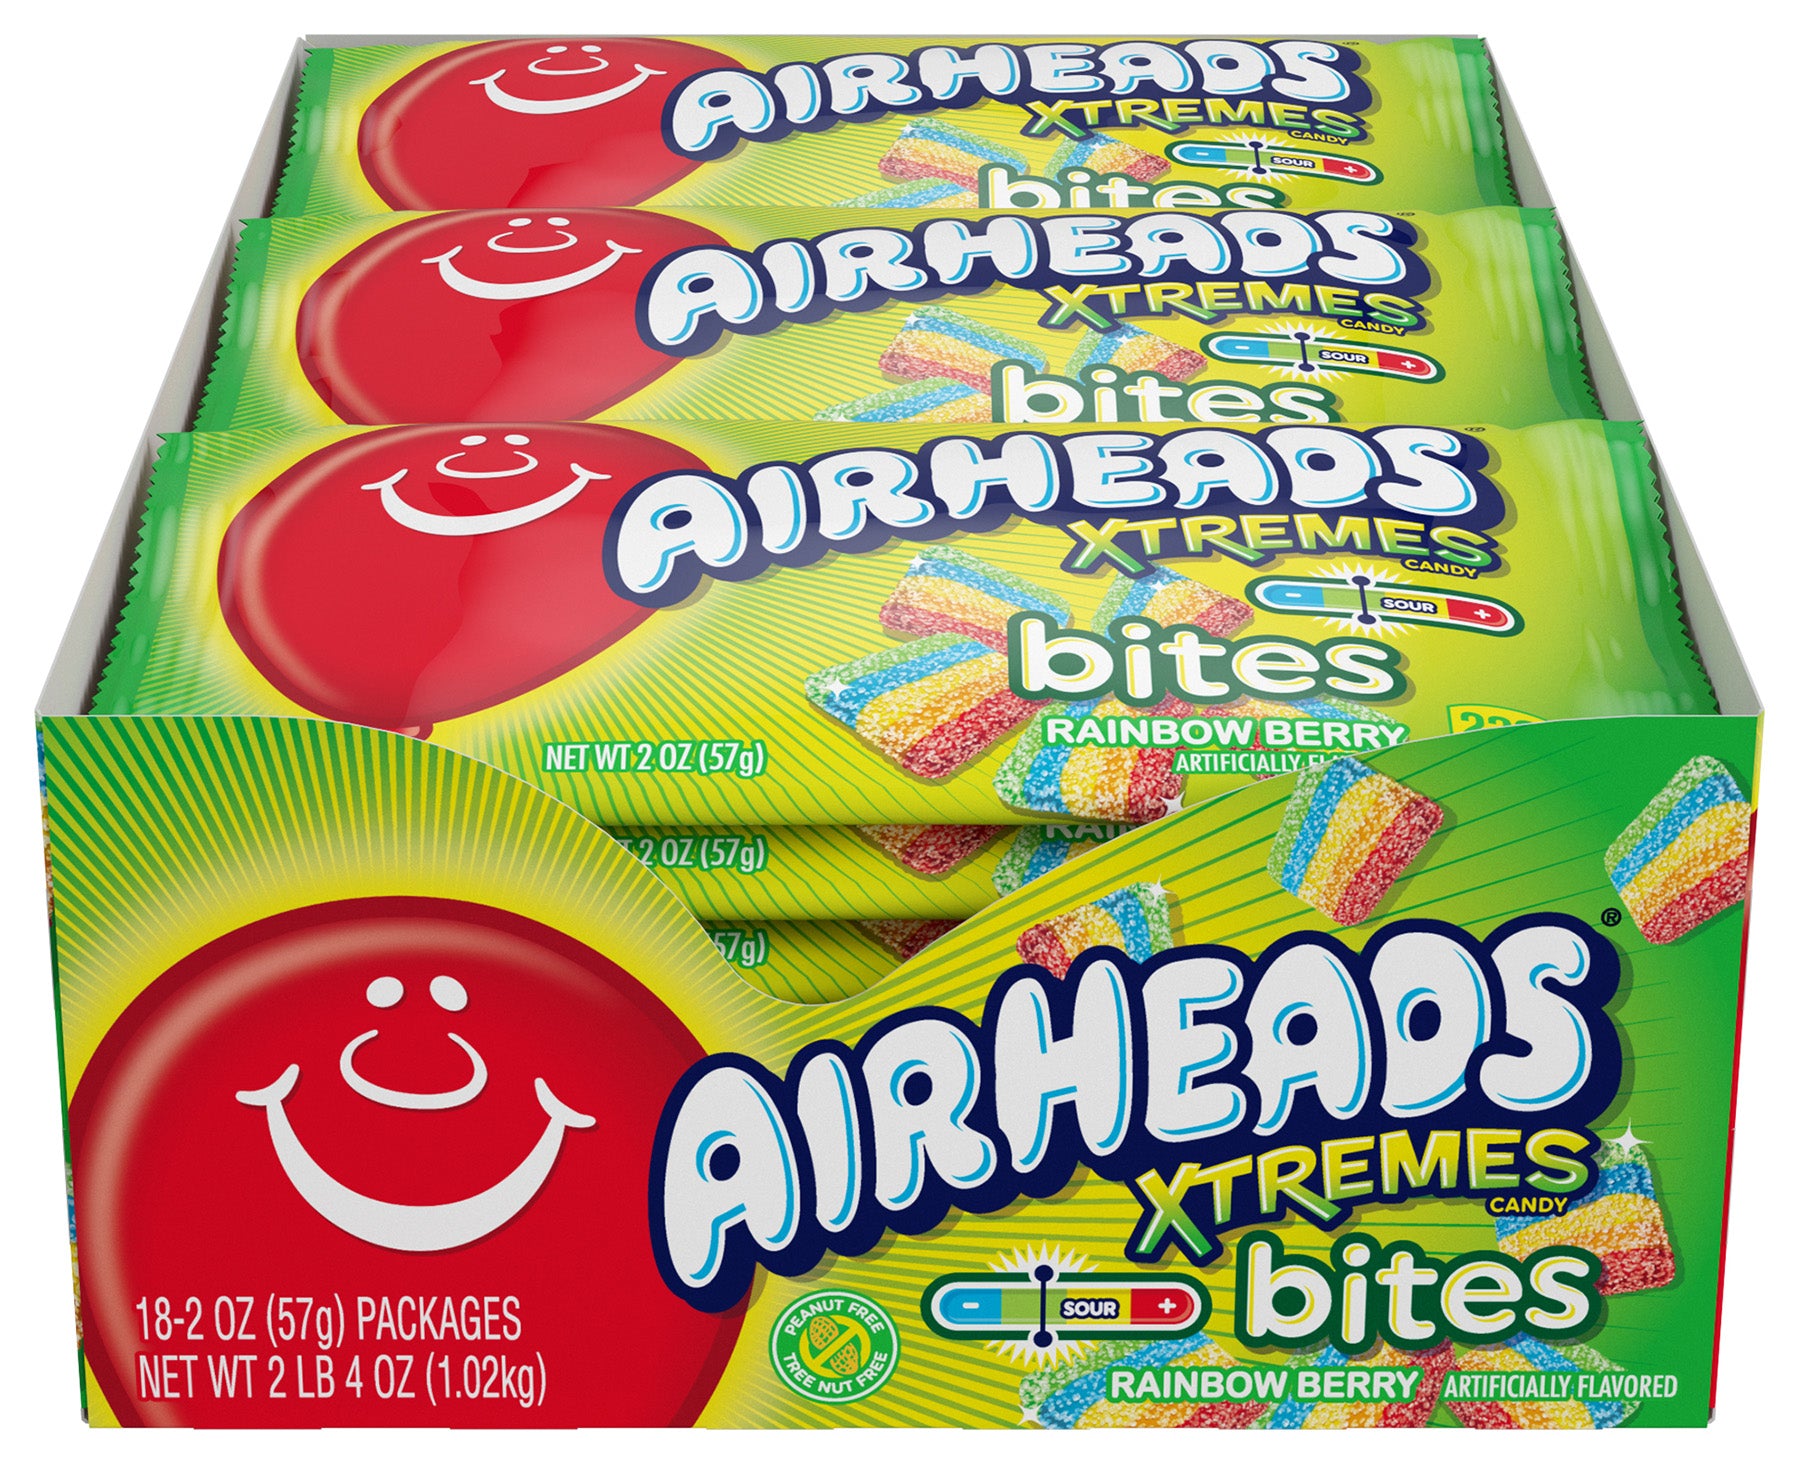 AIRHEADS Xtremes Bites Rainbow Berry 57g (12 Pack) - V43